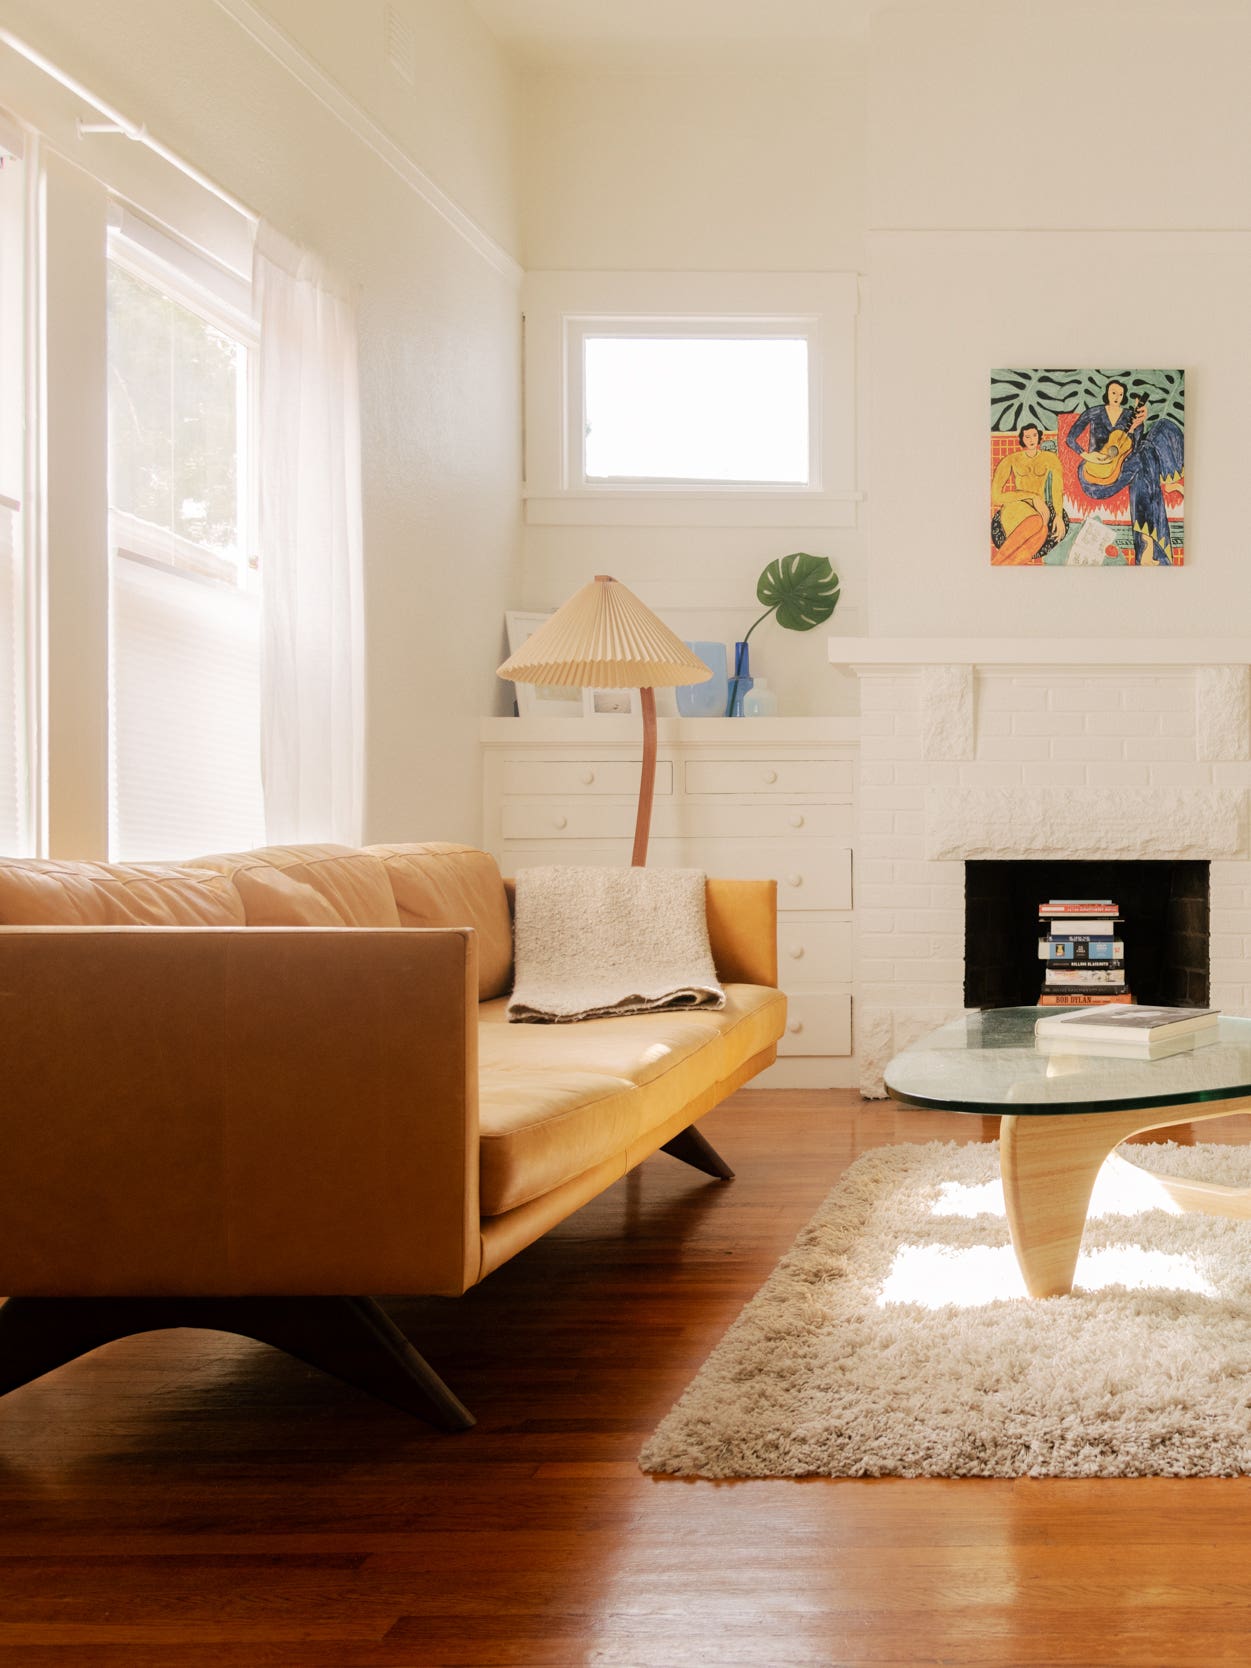 This Minimal, Zen SF Home Will Inspire You to Live Clutter-Free